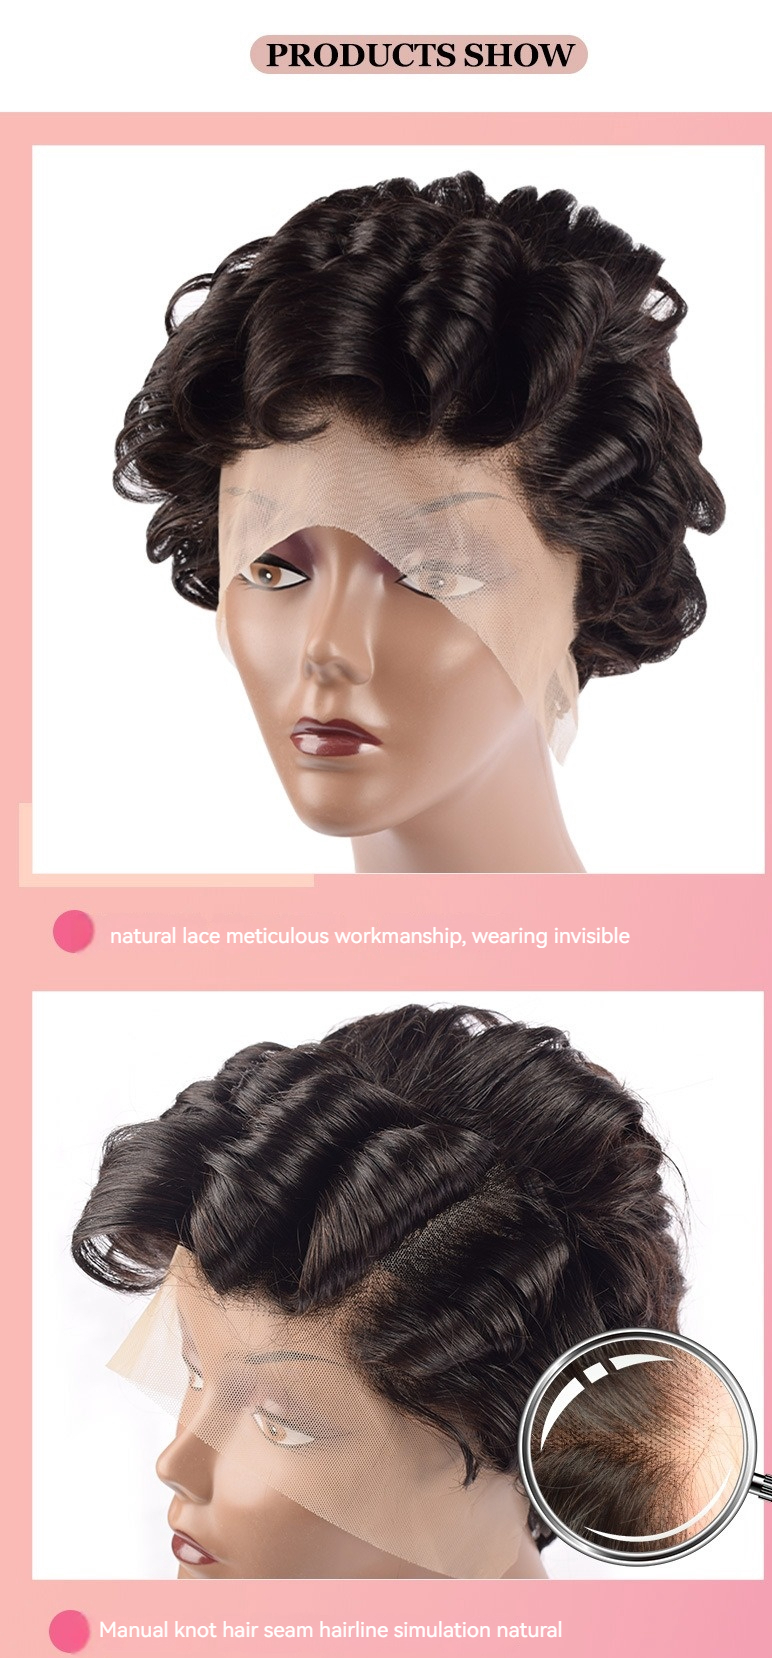 Reveal your natural beauty with our AF Pixie Wig, showcasing curly strands in a full frontal lace design and meticulously crafted from human hair for a stunning and authentic look.